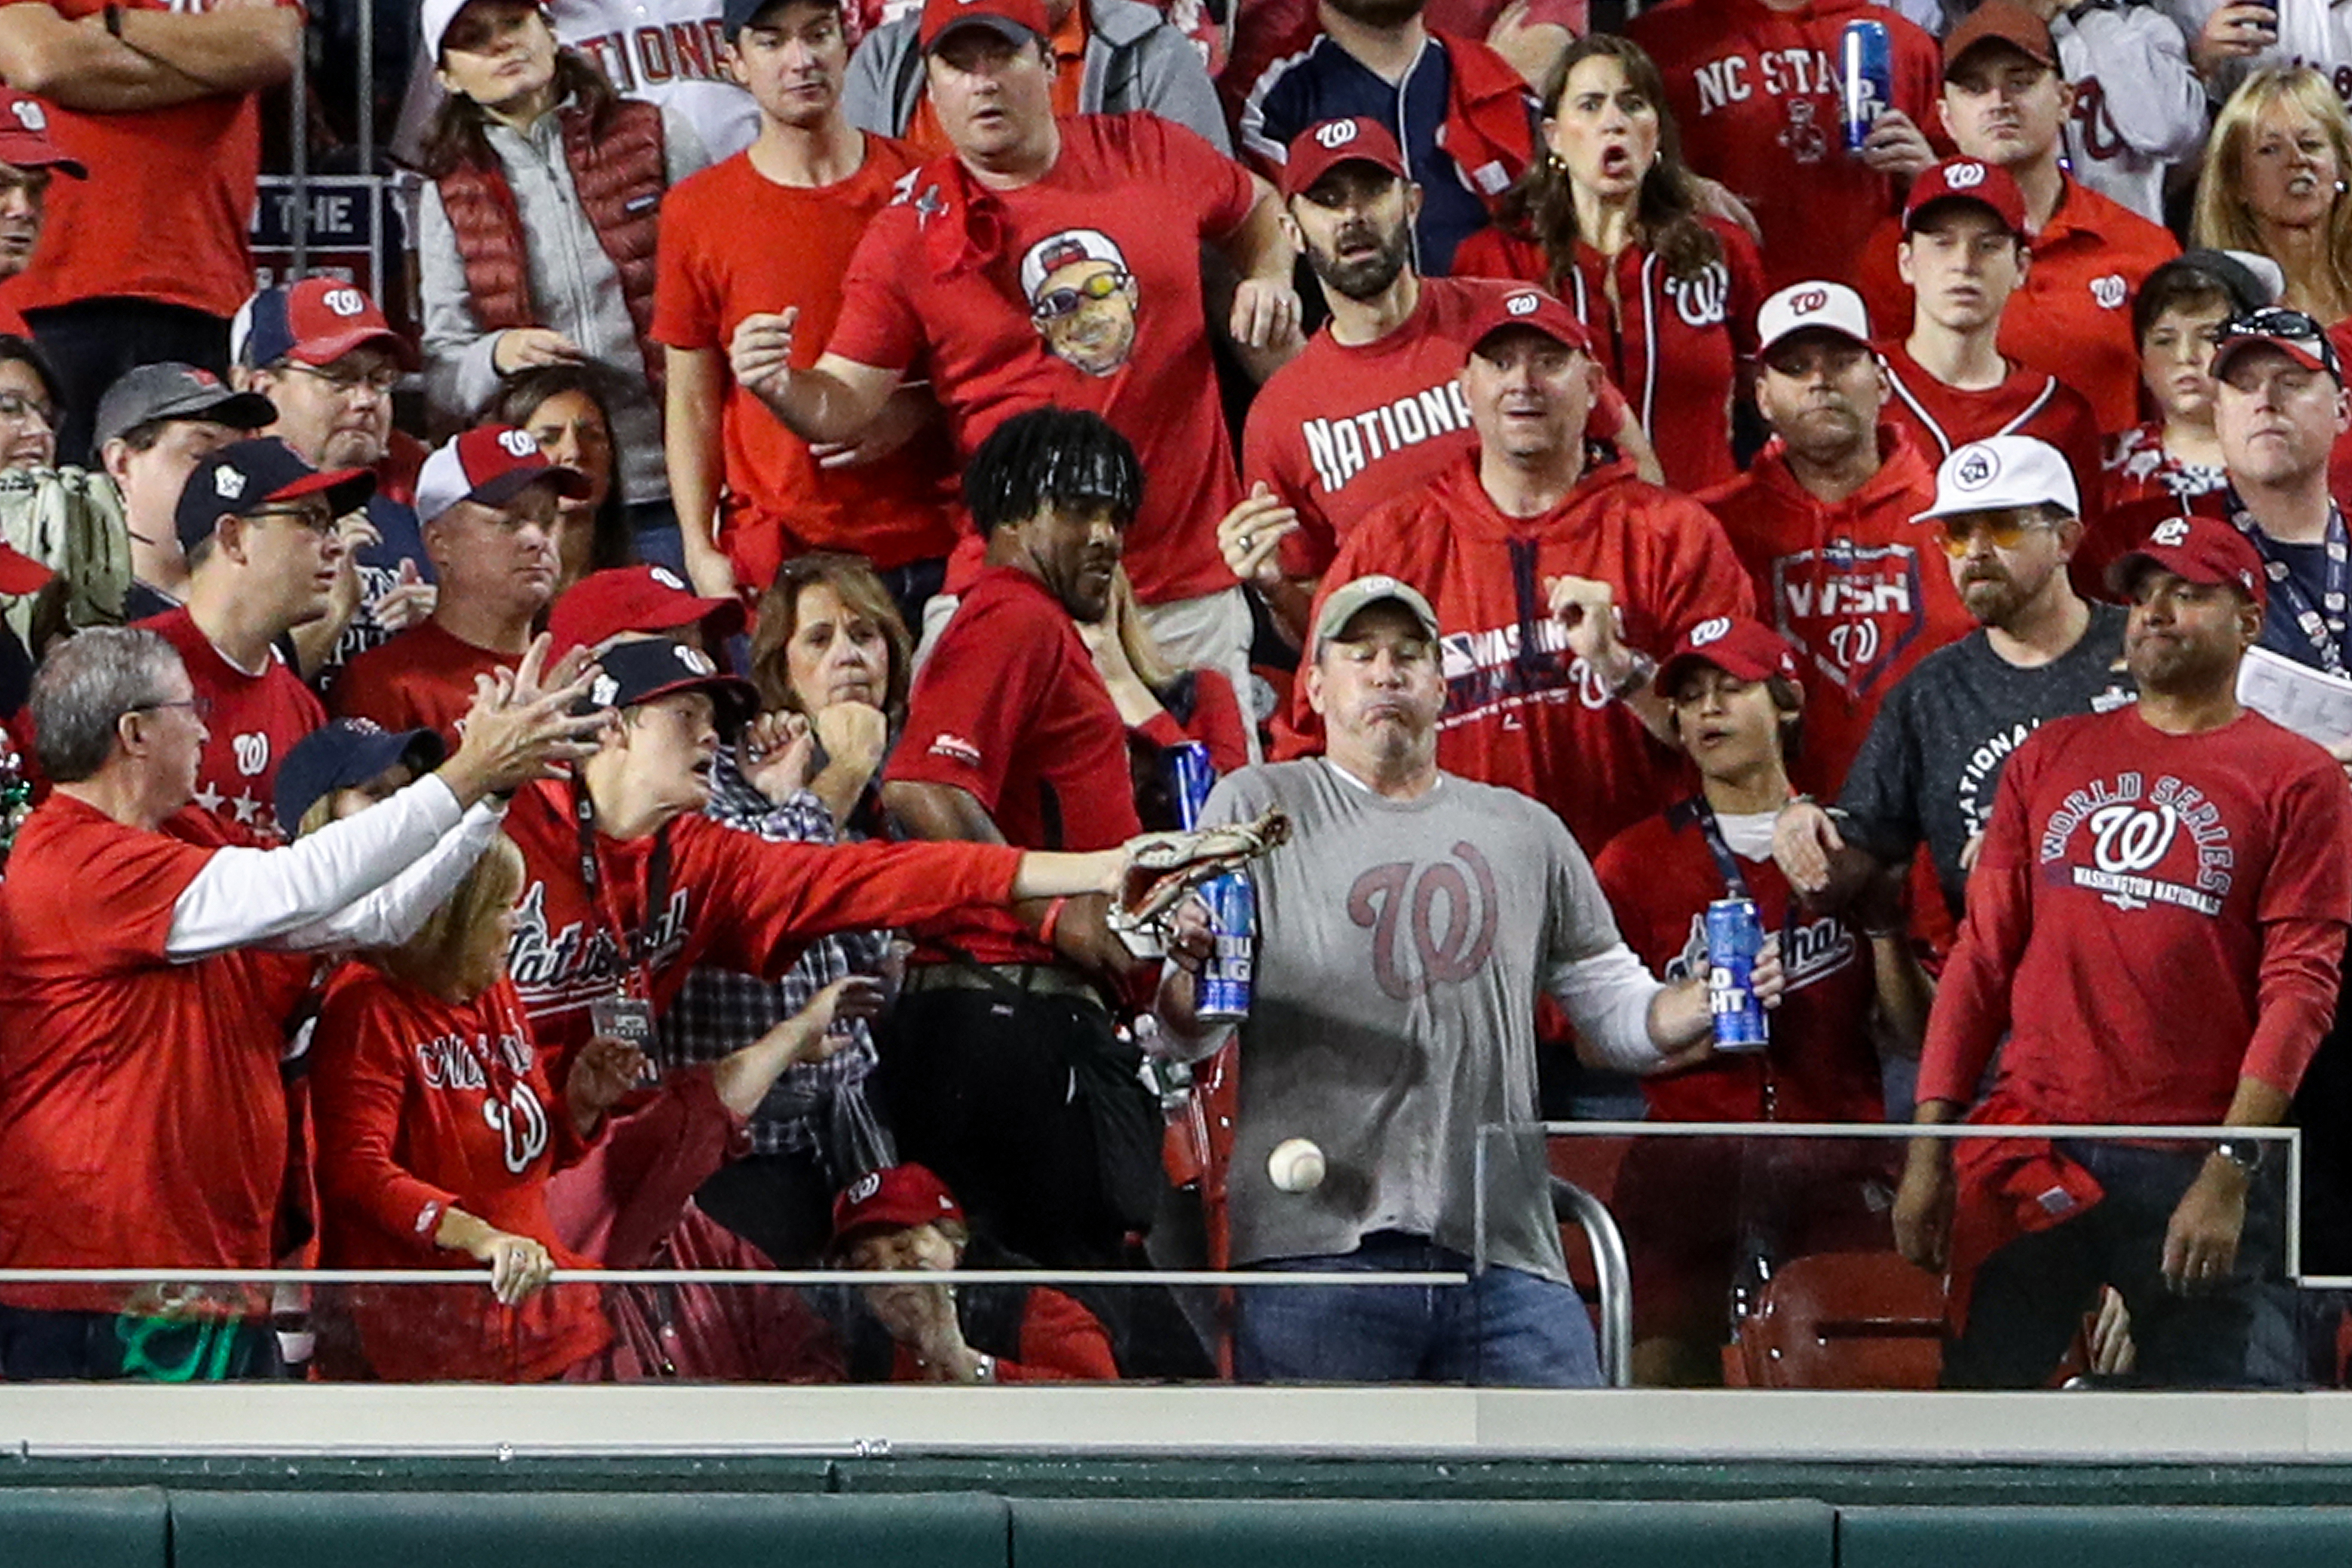 Washington Nationals 'get down to business' at World Series in